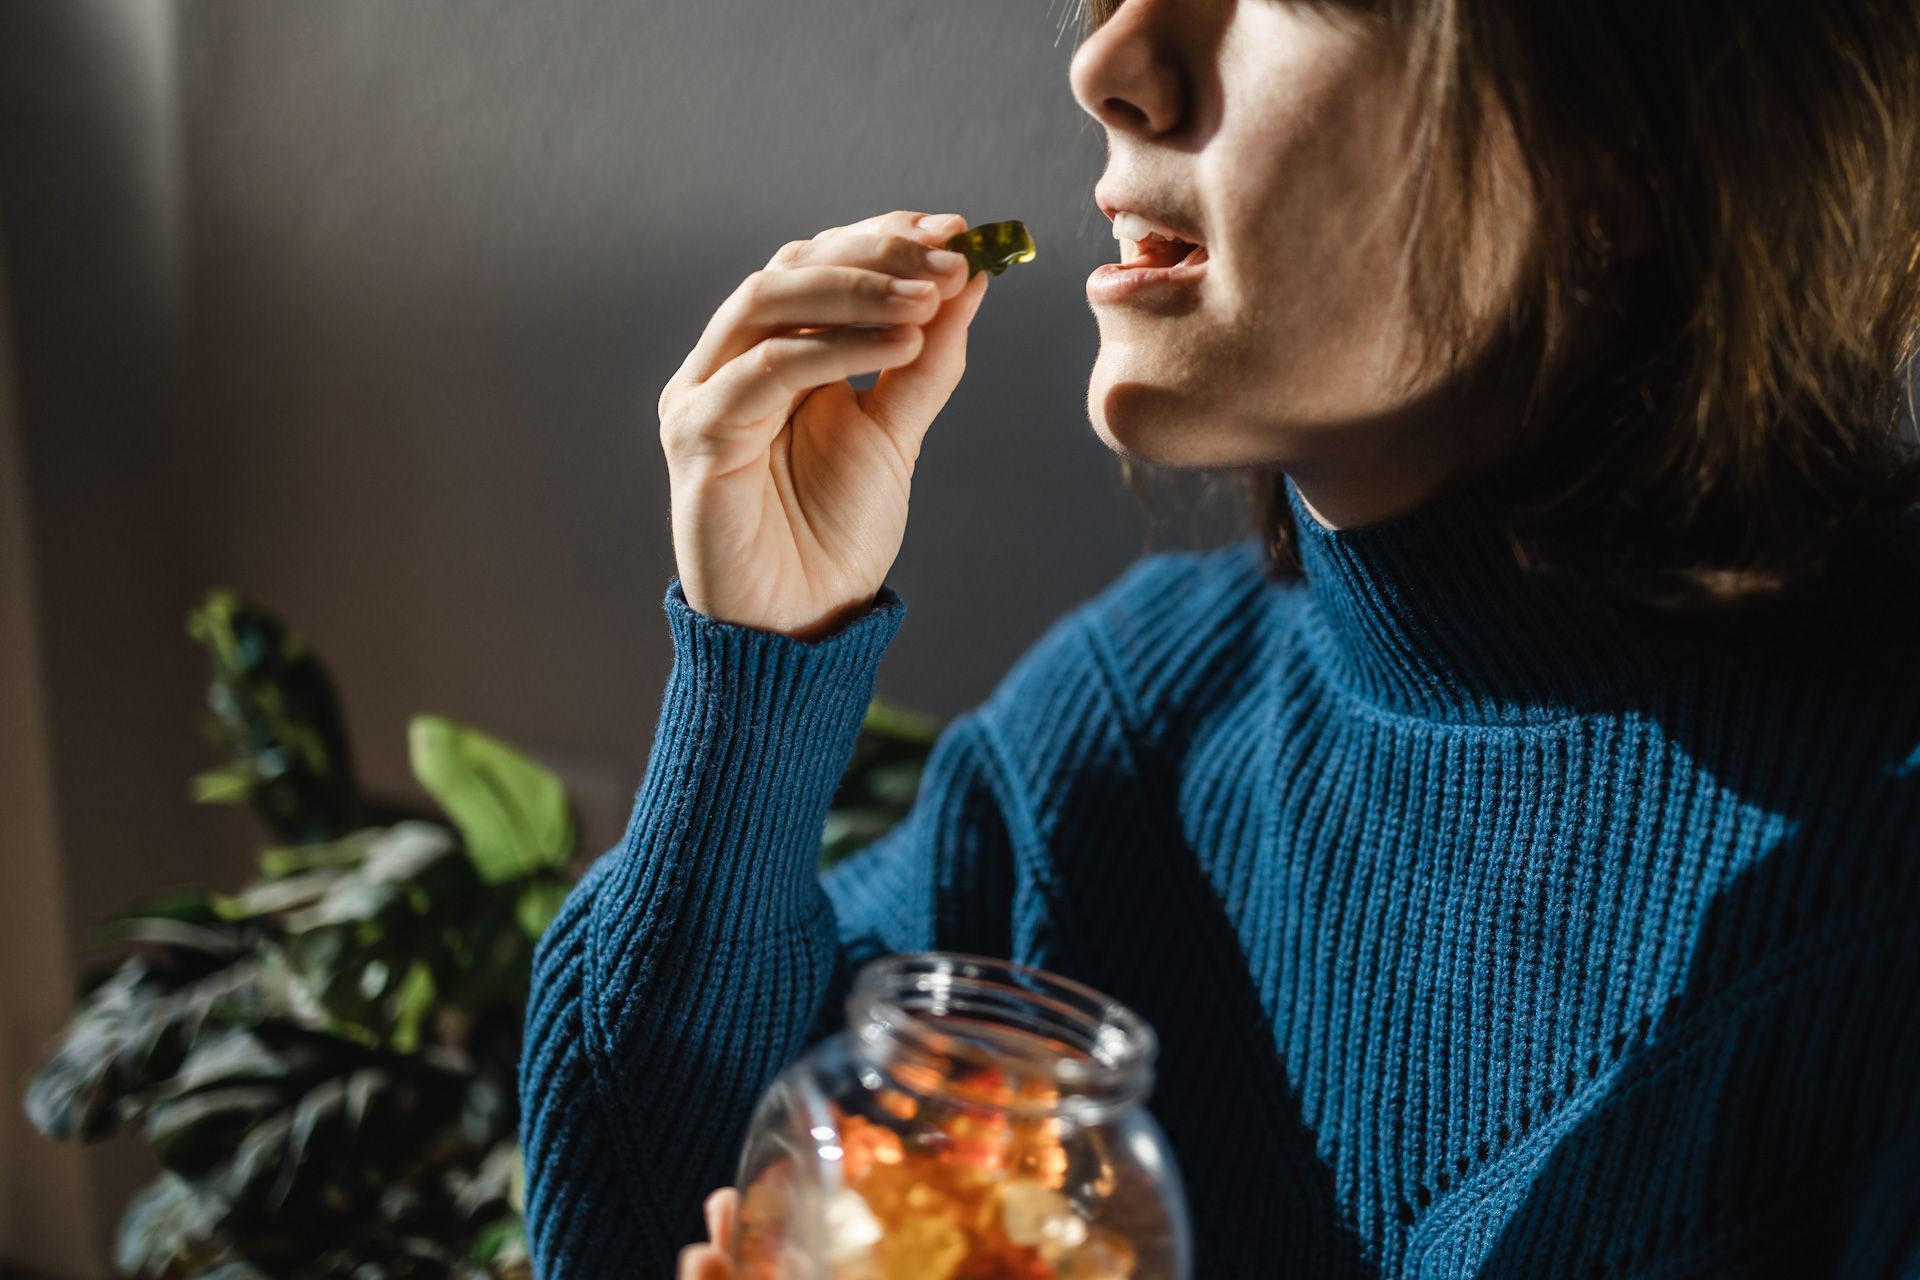 Woman eating edible weed sweet candy leaf 